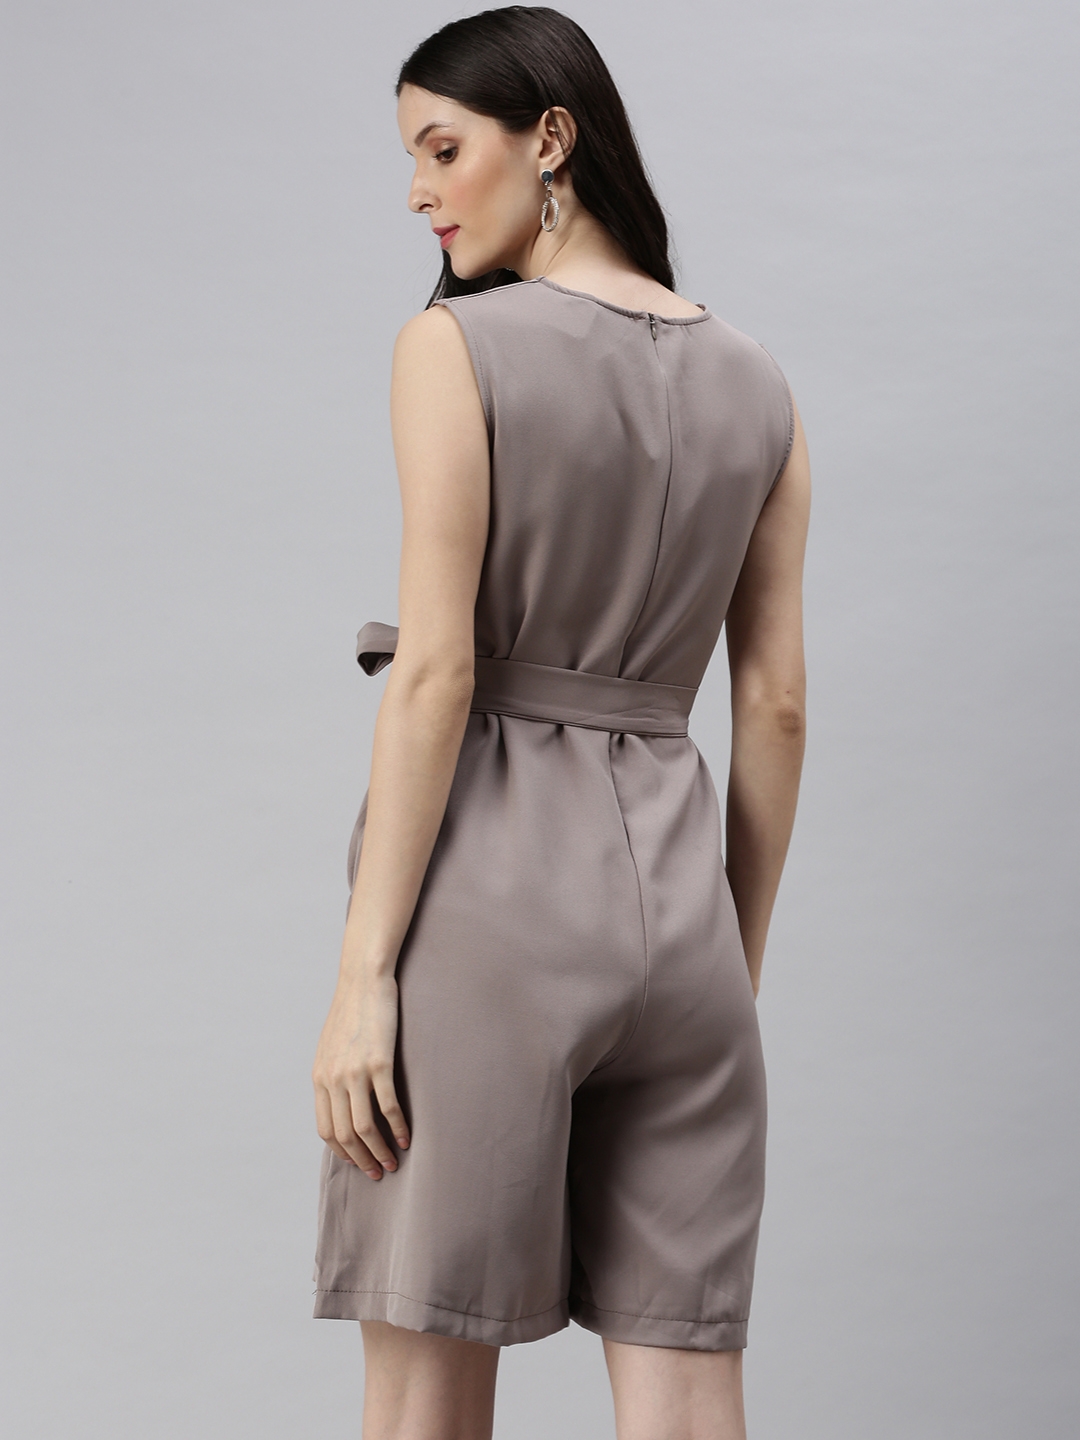 Women's Beige Polyester Solid Jumpsuits